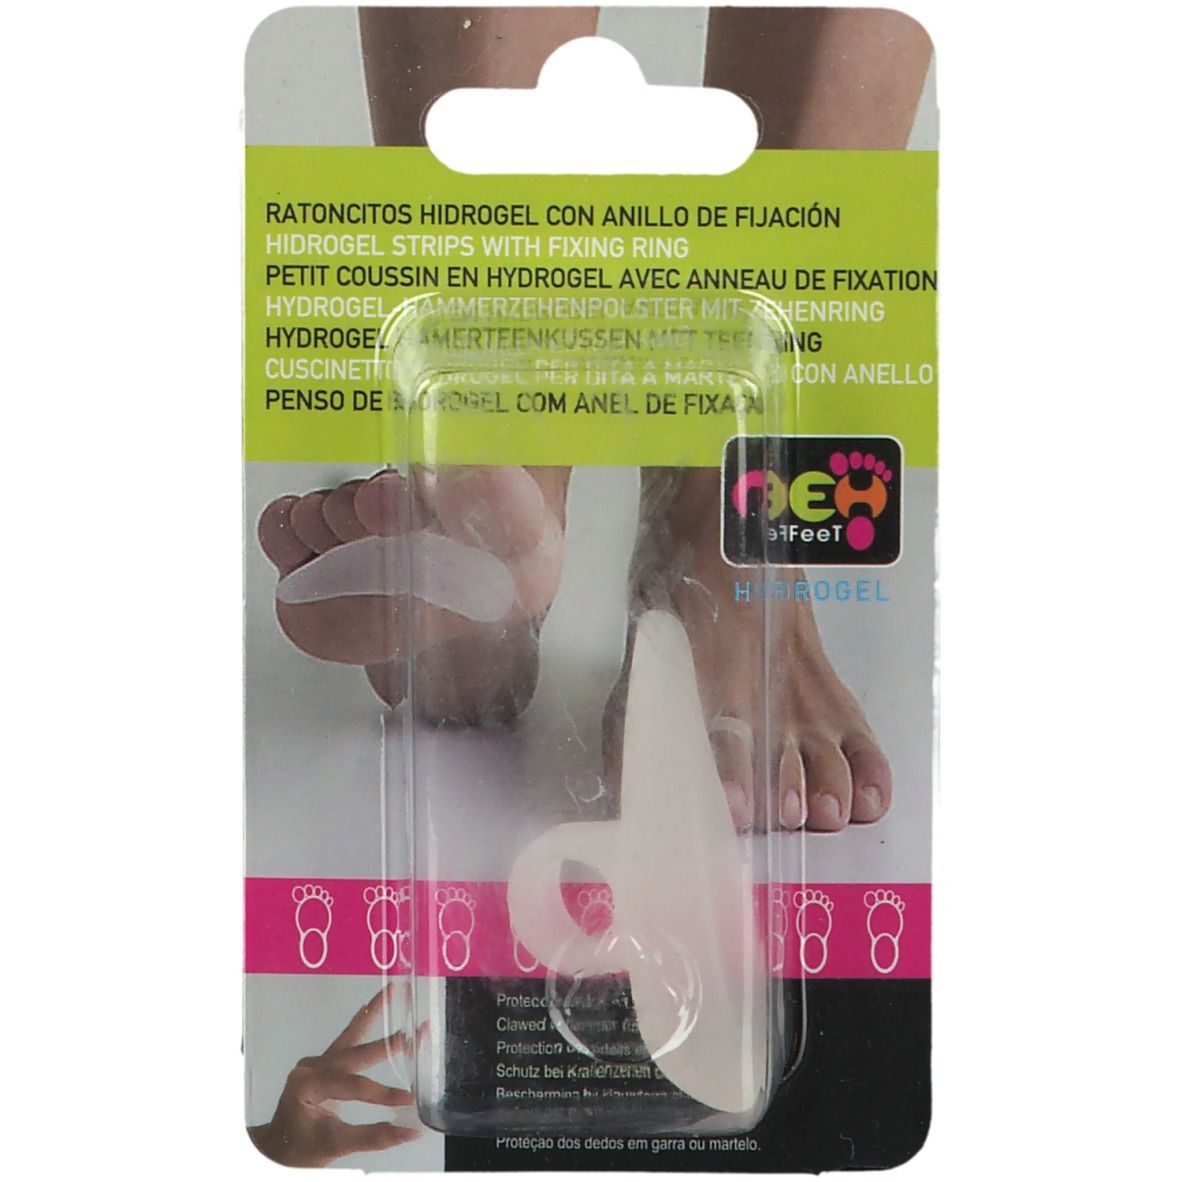 NEH Feet Hydrogel Coussin Orteil Gauche Taille 35-38